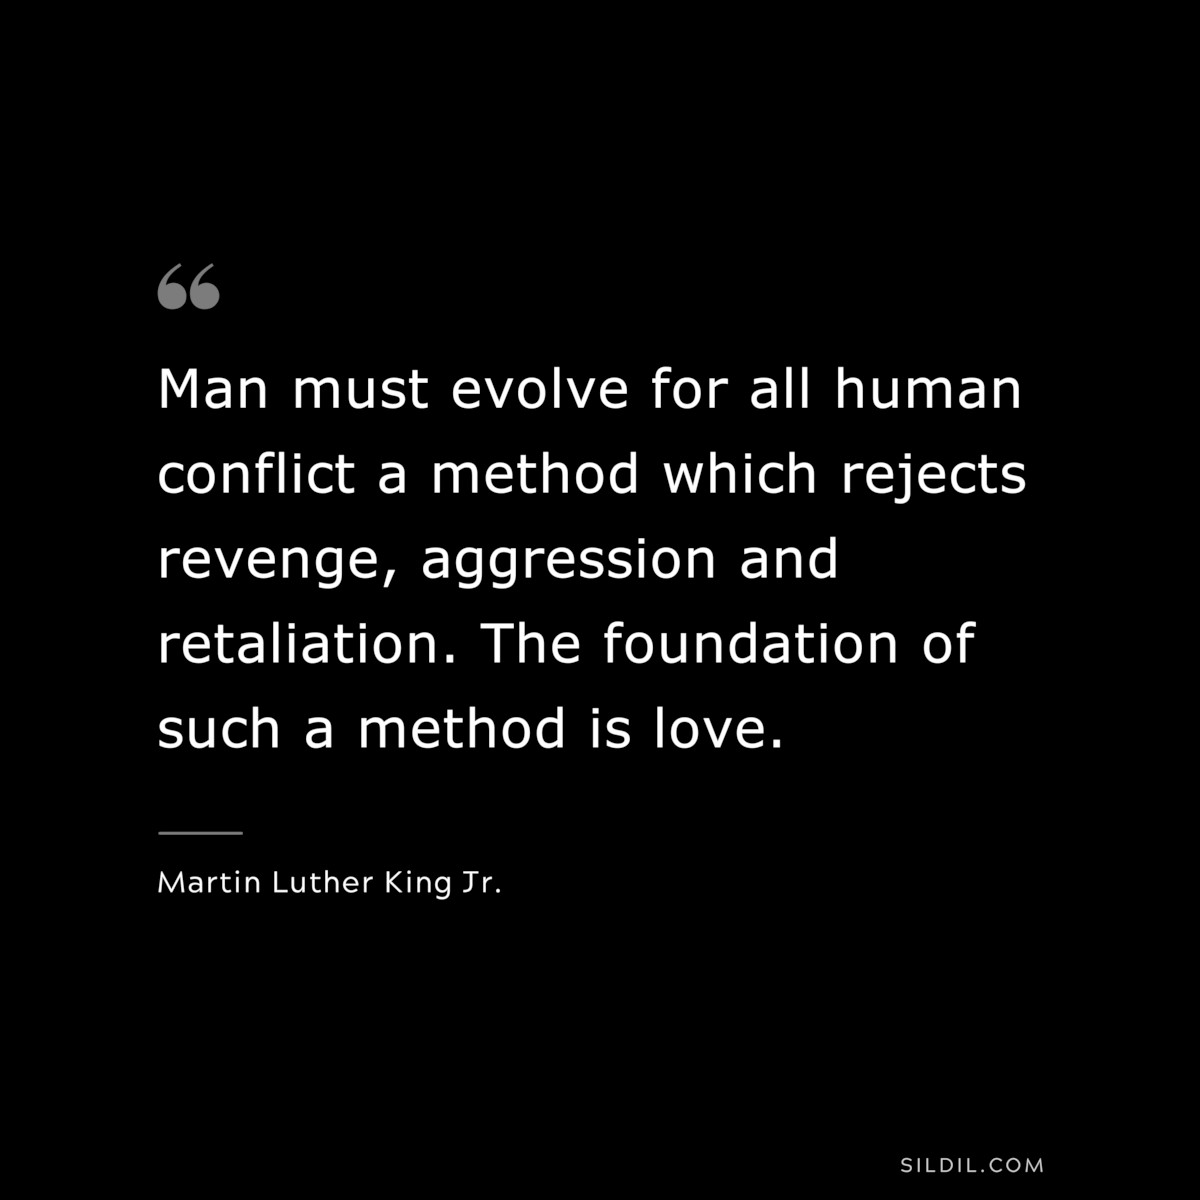 Man must evolve for all human conflict a method which rejects revenge, aggression and retaliation. The foundation of such a method is love. ― Martin Luther King Jr.